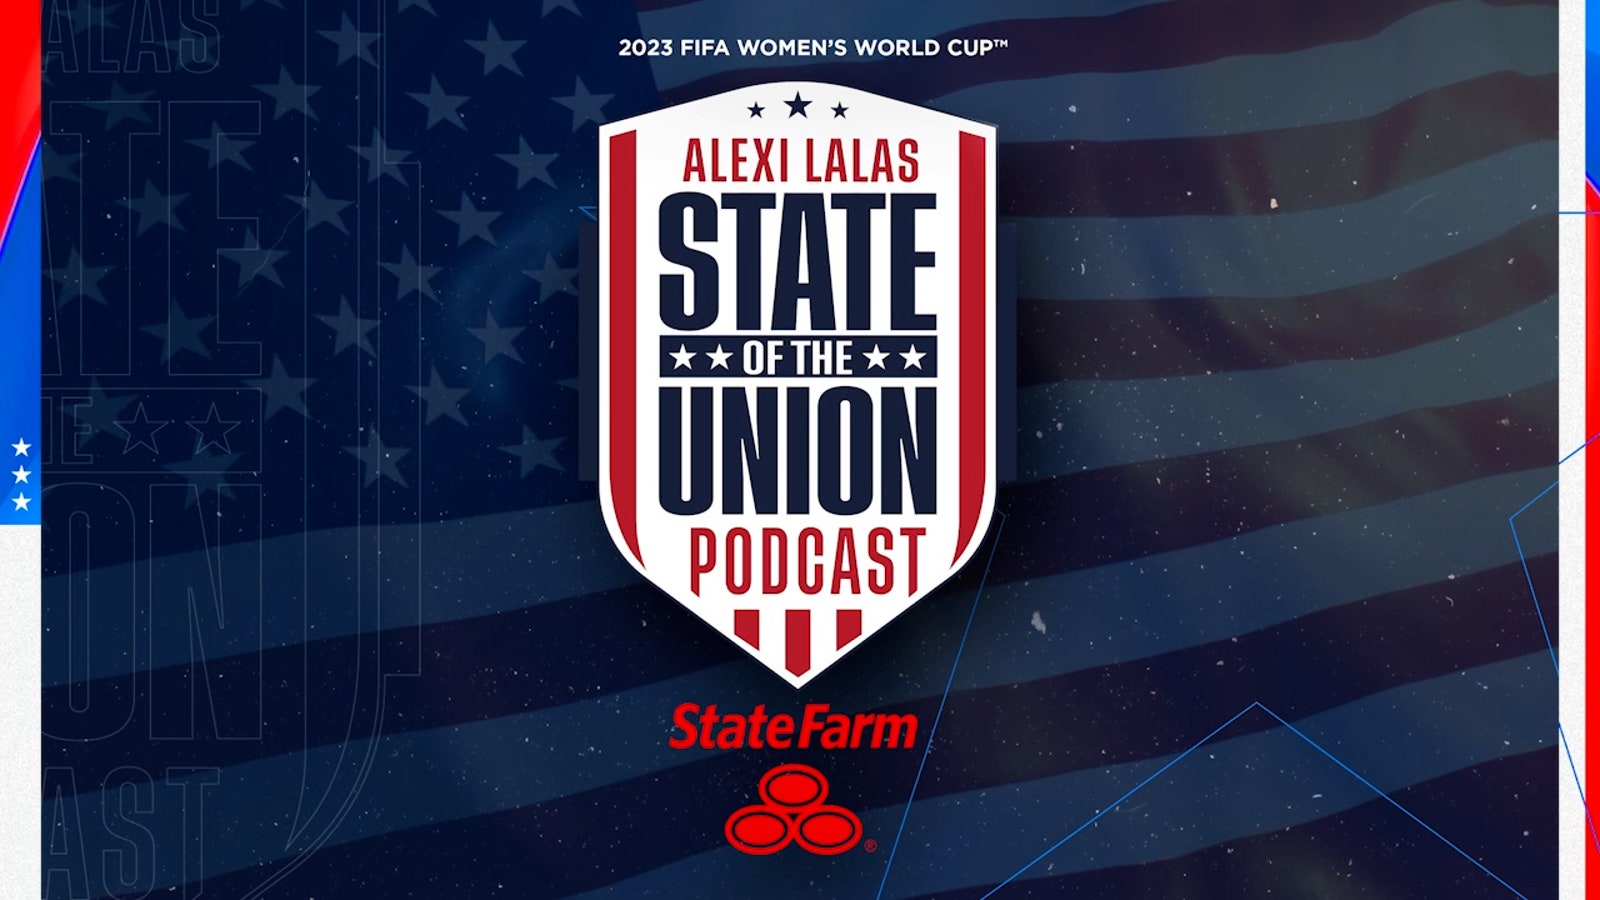 Alexi Lalas' State of the Union